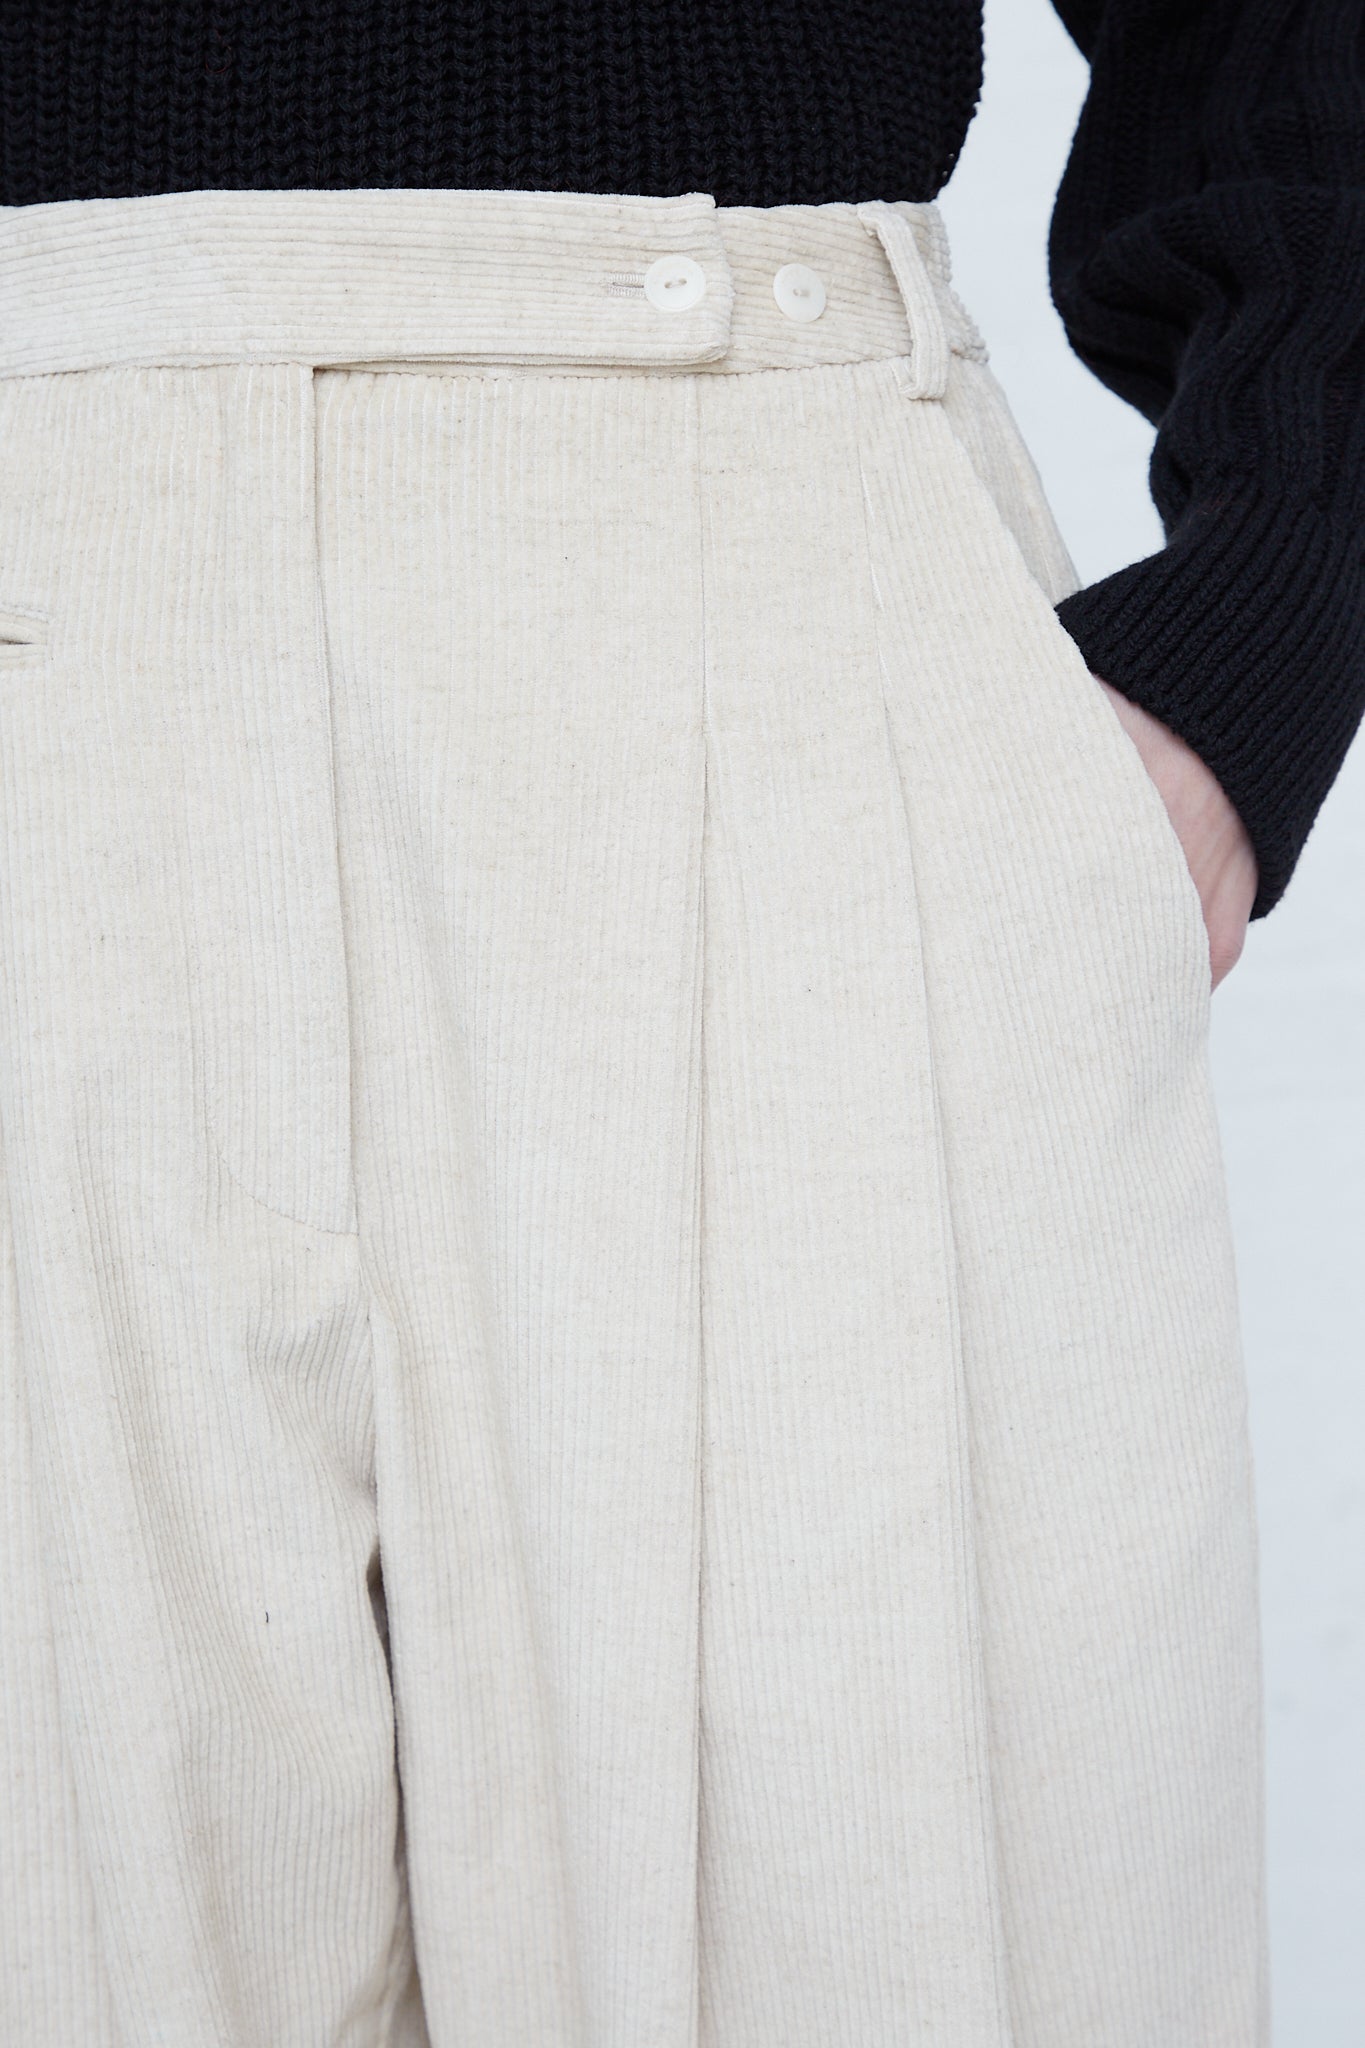 A woman wearing Cordera's Corduroy Carrot Pants in Off White made in Spain.